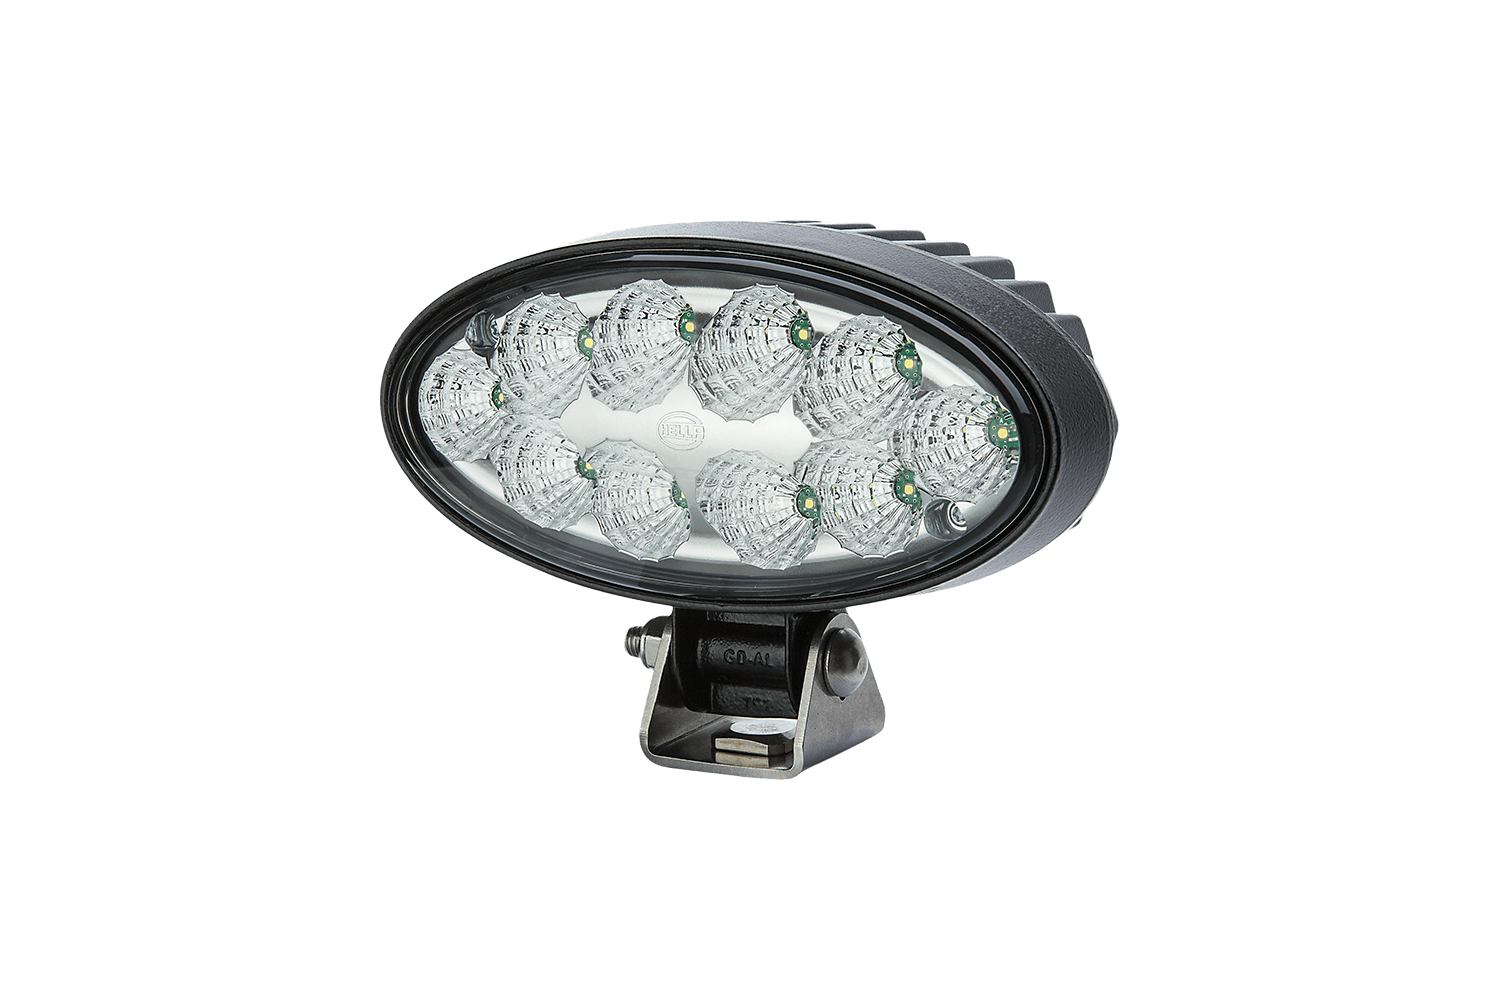 Oval 90 LED Generation 2 work lamps from Hella offered by Patlon